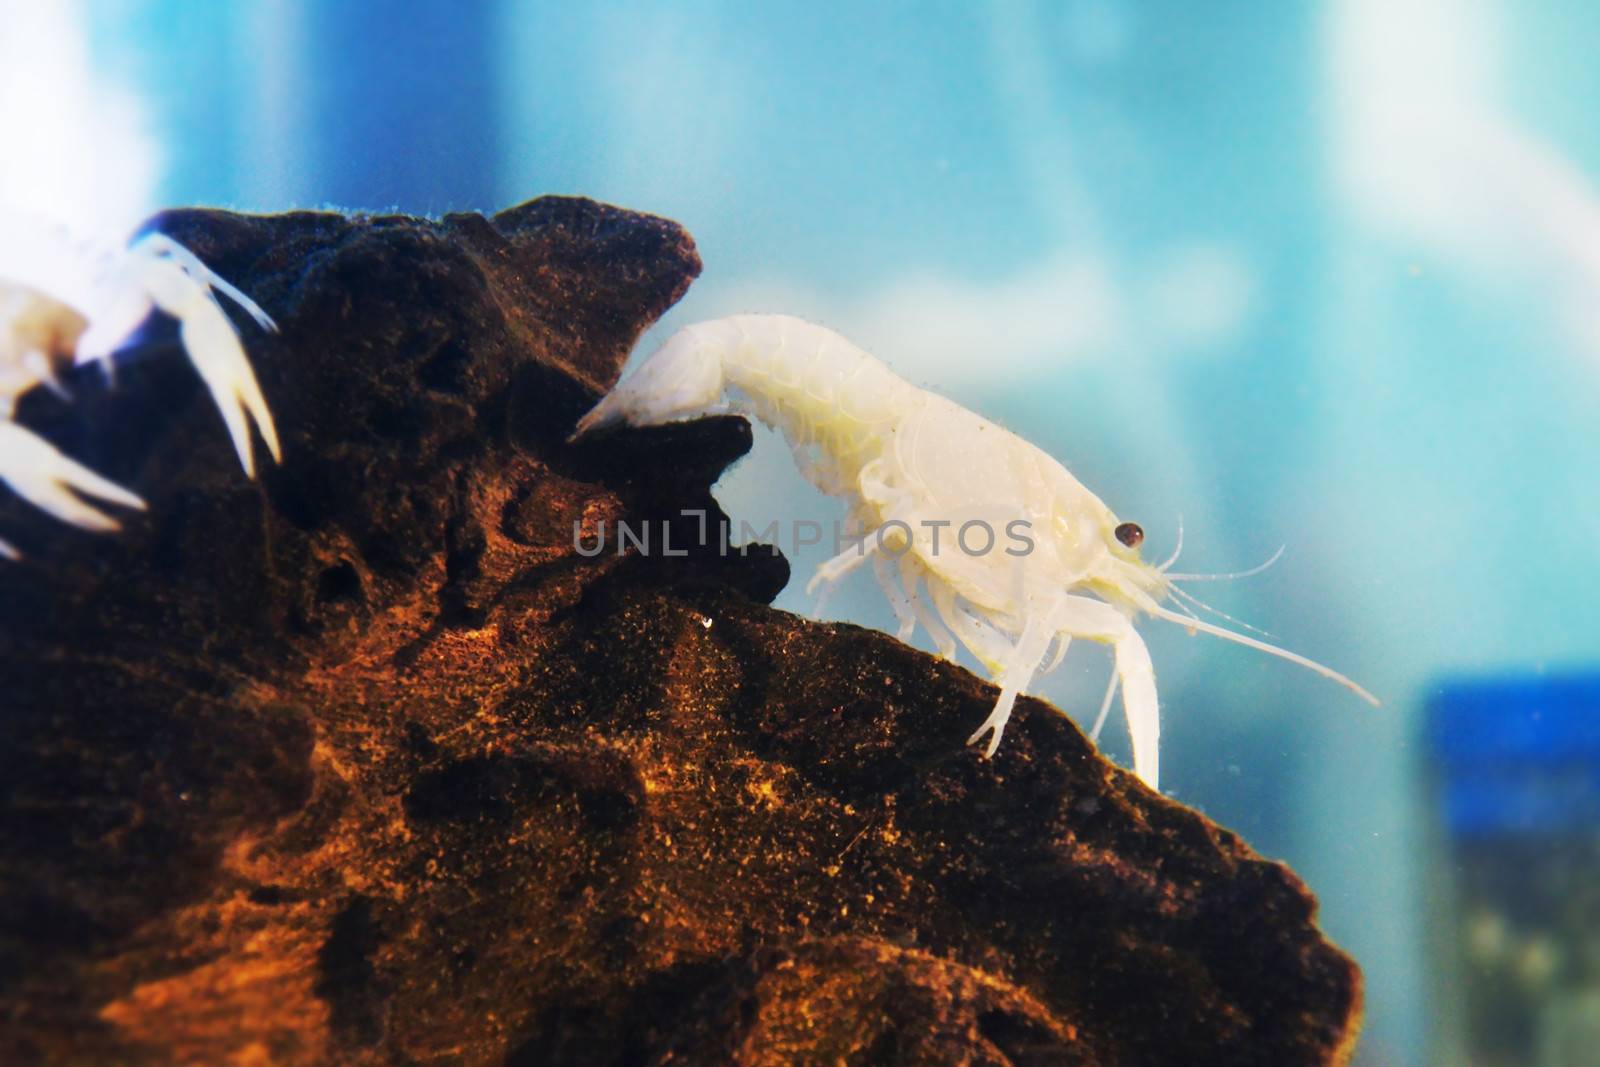 white crayfish in water by apichart